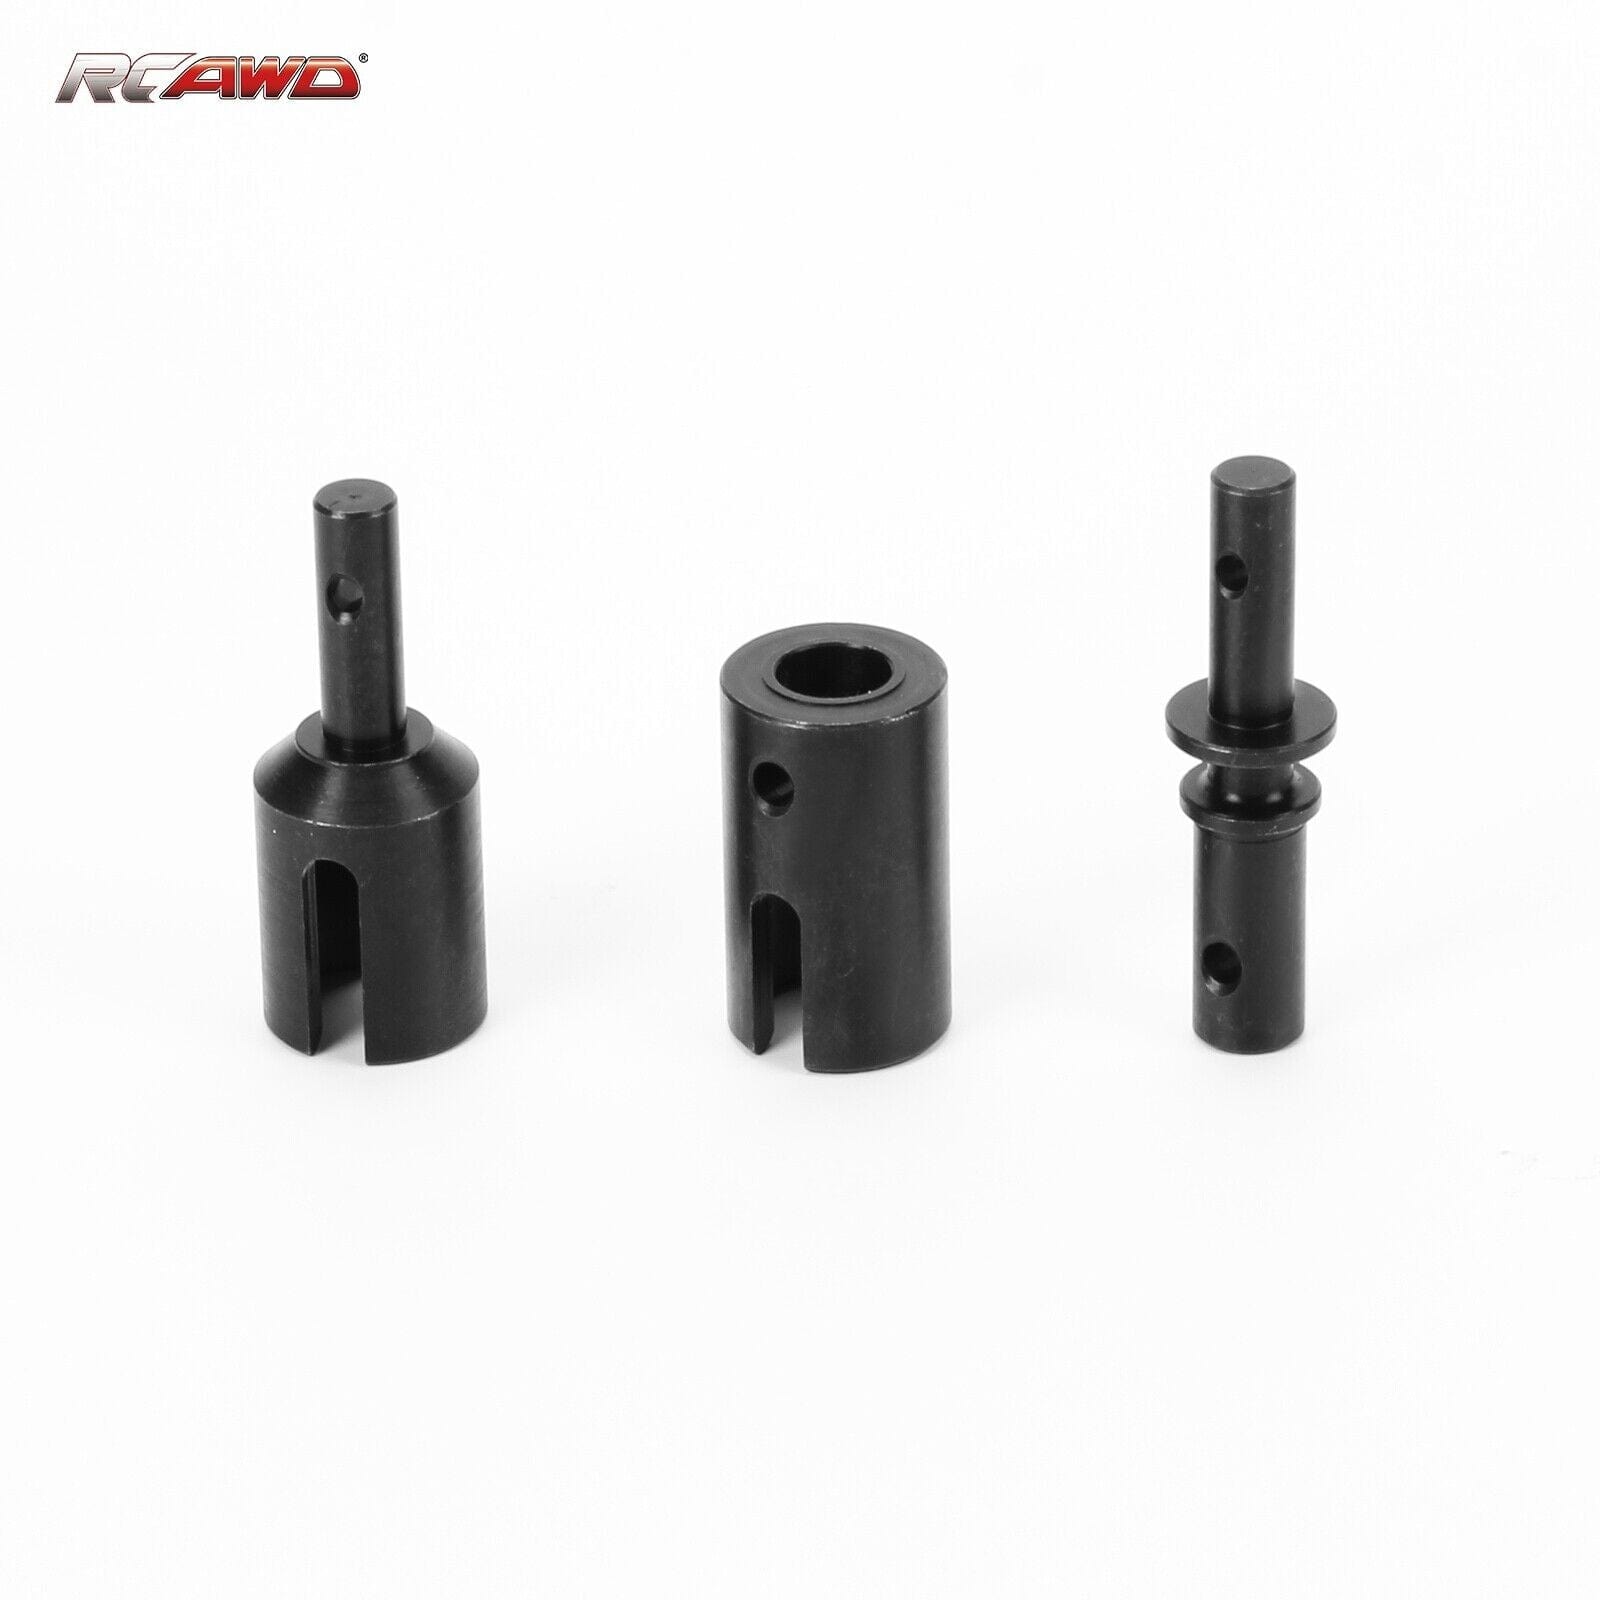 RCAWD Black Losi Super Baja Rey Rock Rey  Center Diff Outdrive Set LOS252087- RCAWD